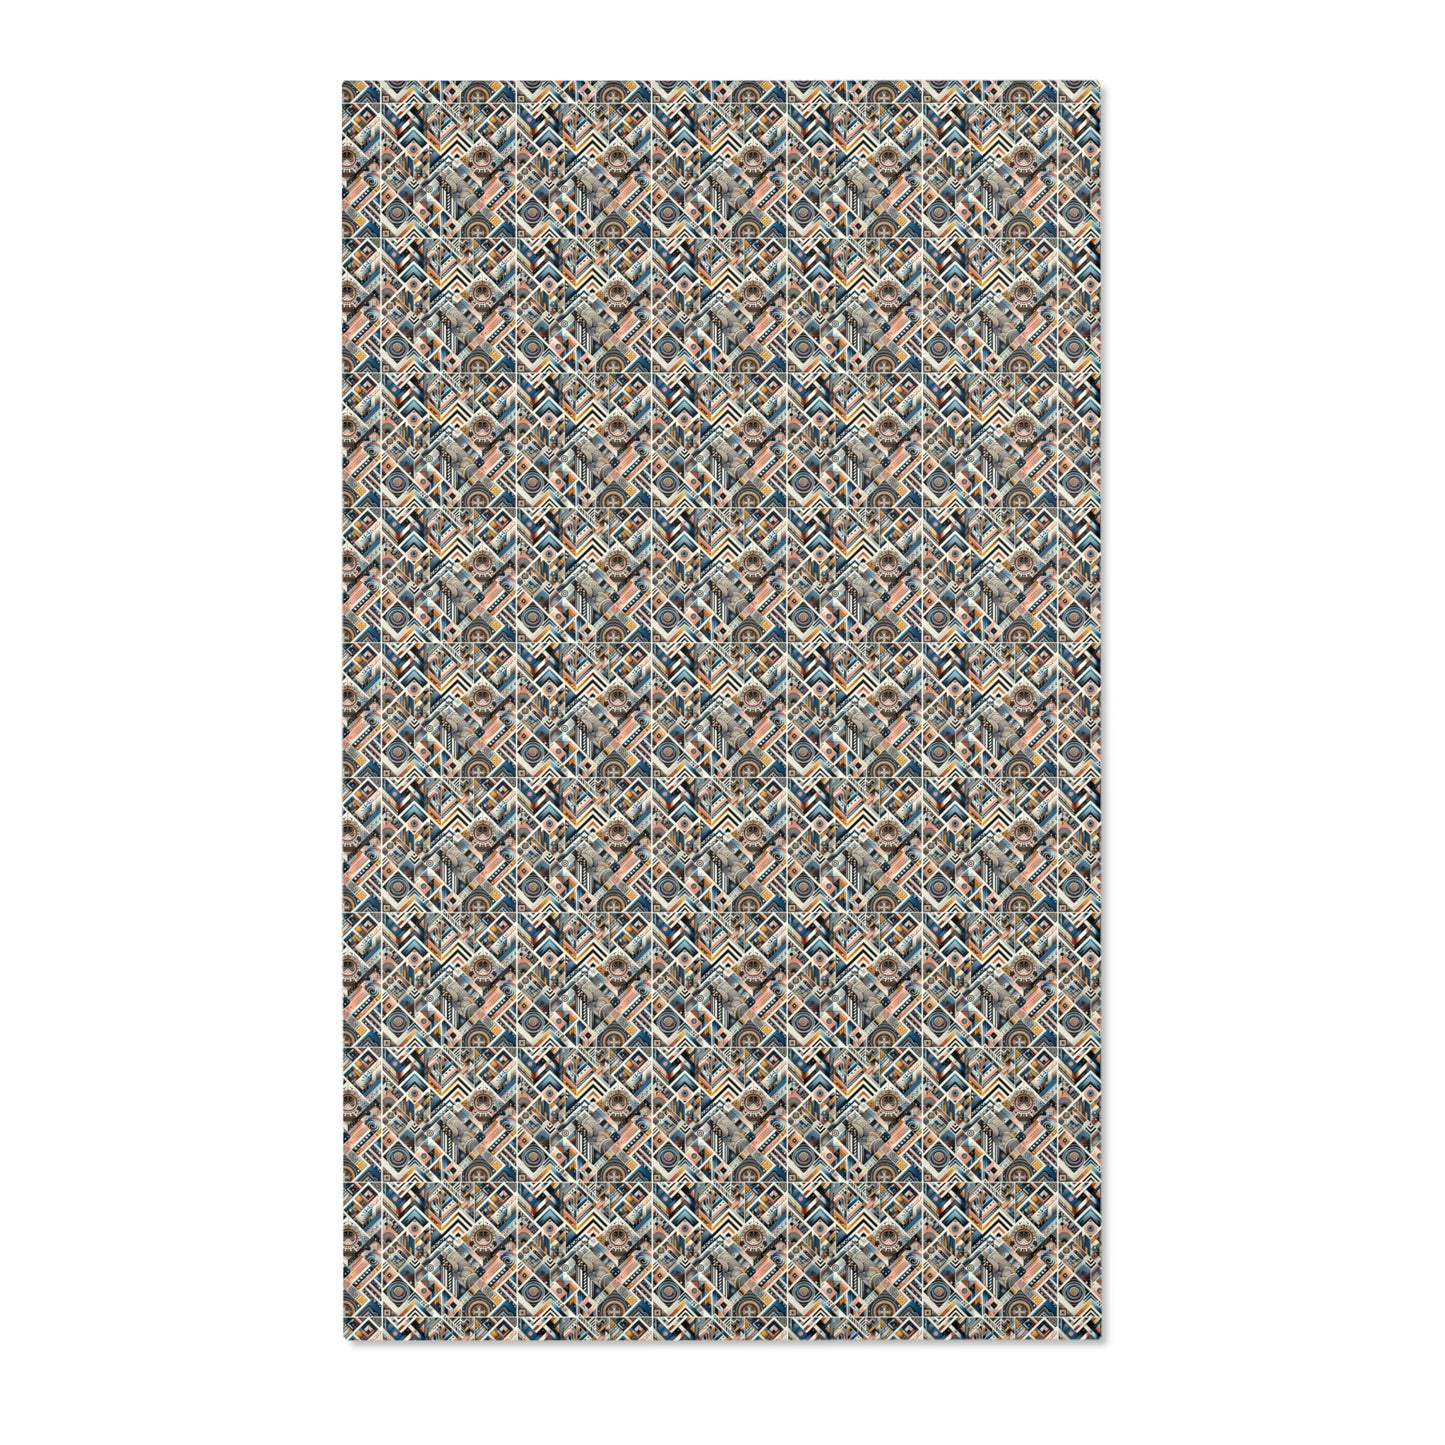 Global Tapestry: Eclectic Geometric & Cultural-Inspired Area Rug